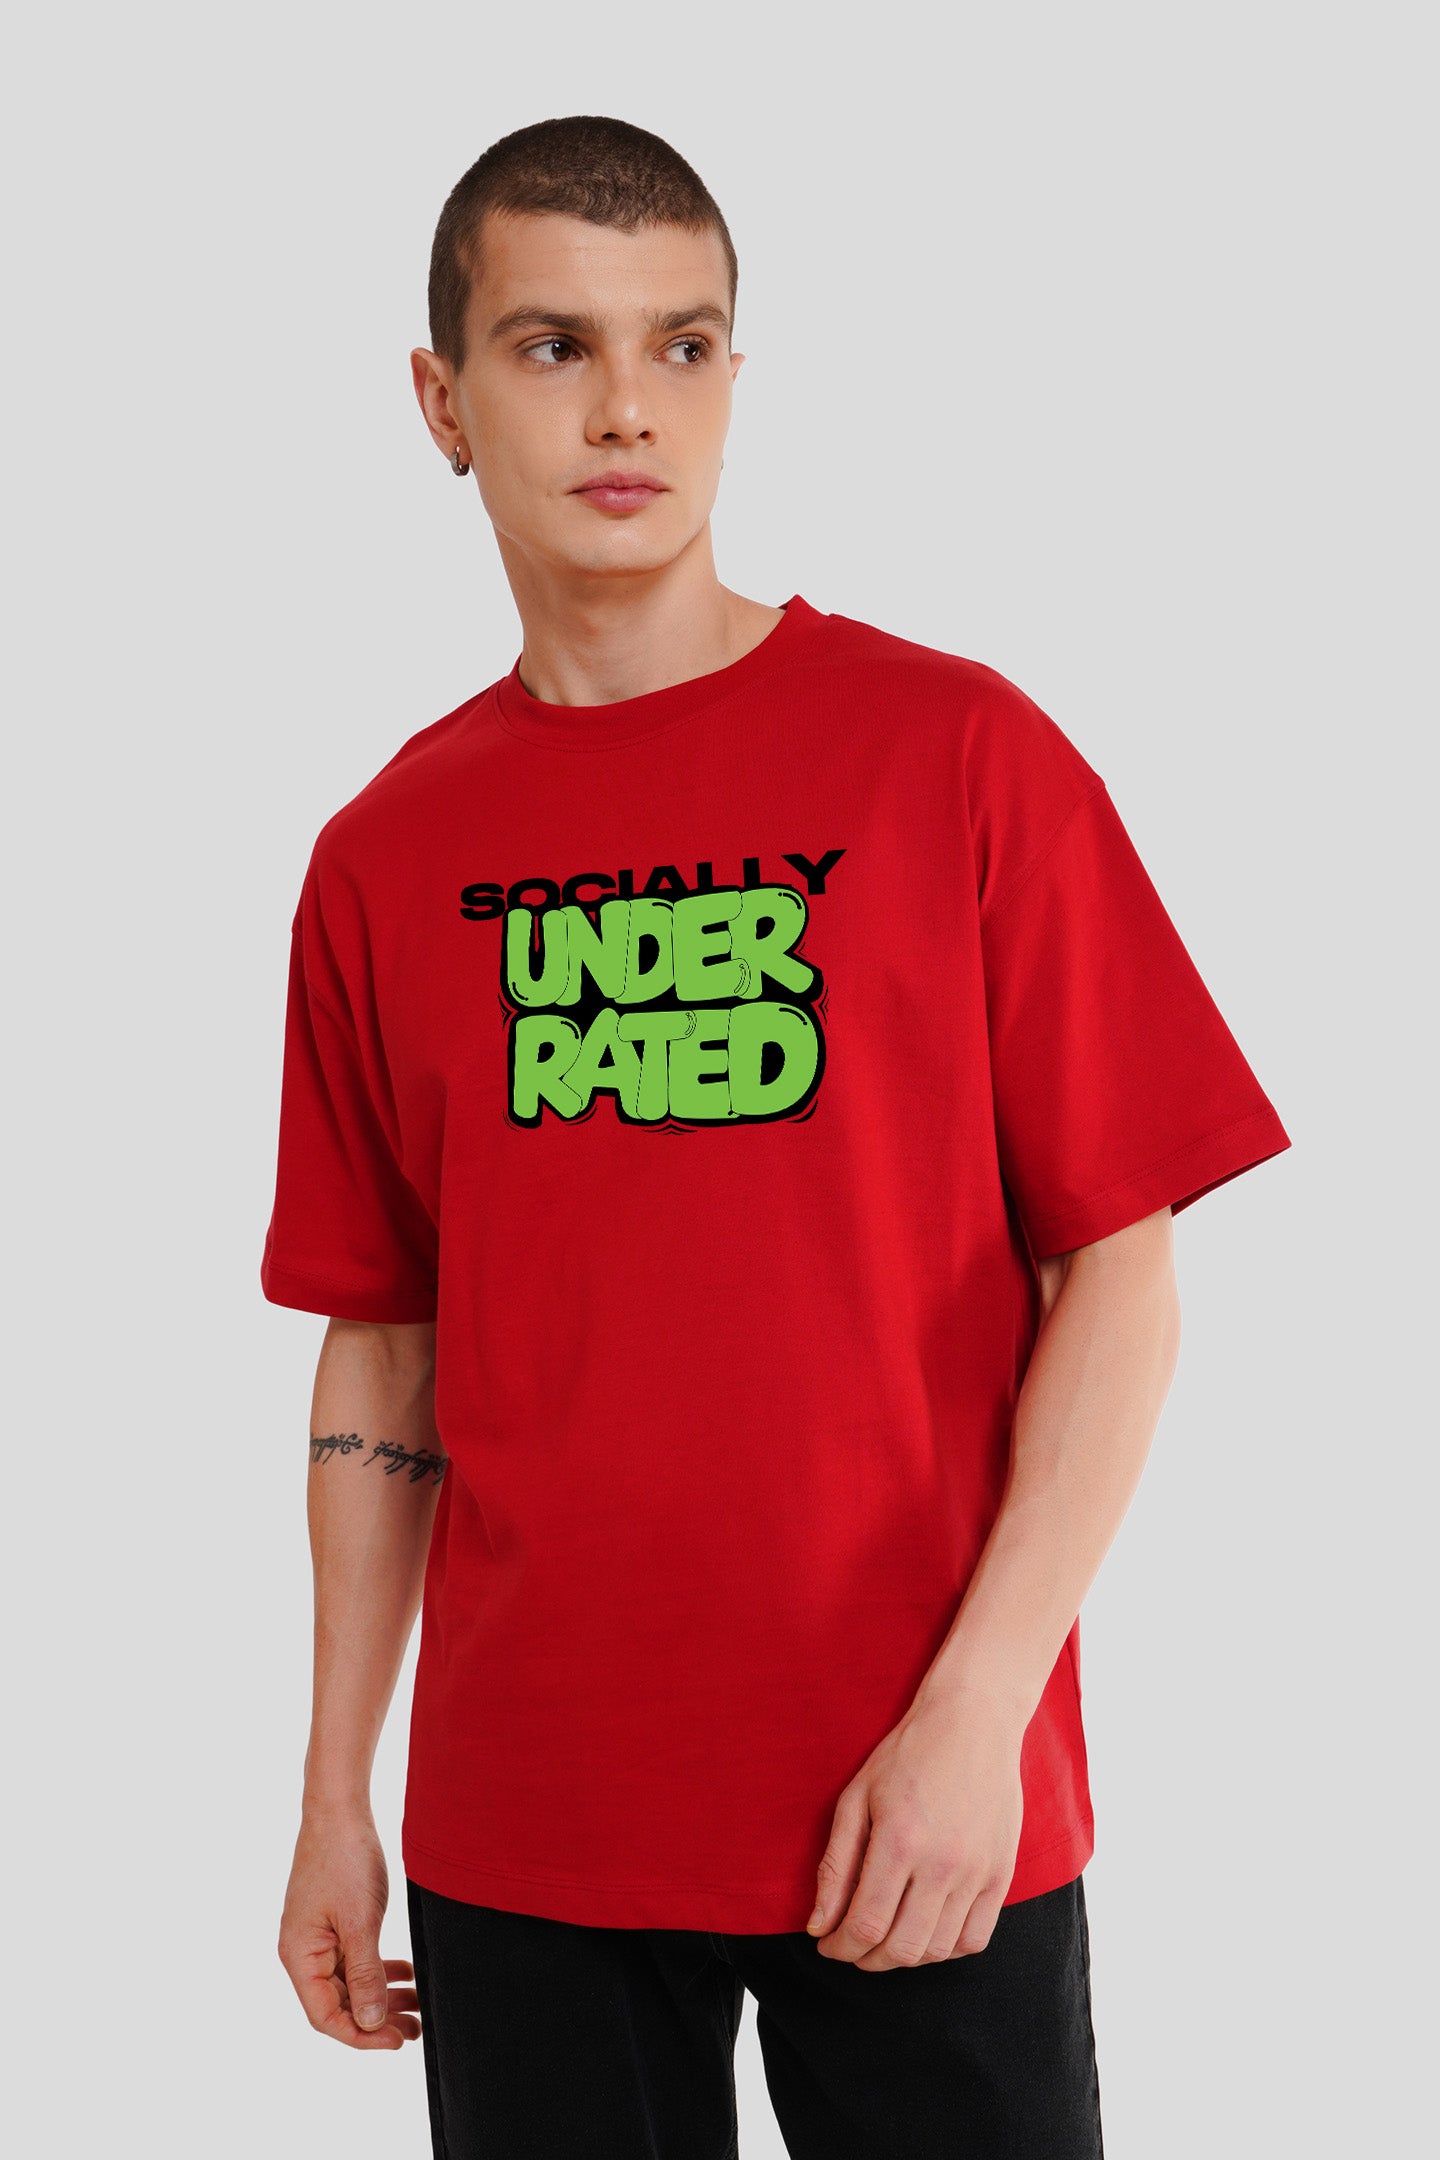 Socially Underarted Red Printed T Shirt Men Oversized Fit With Front Design Pic 1